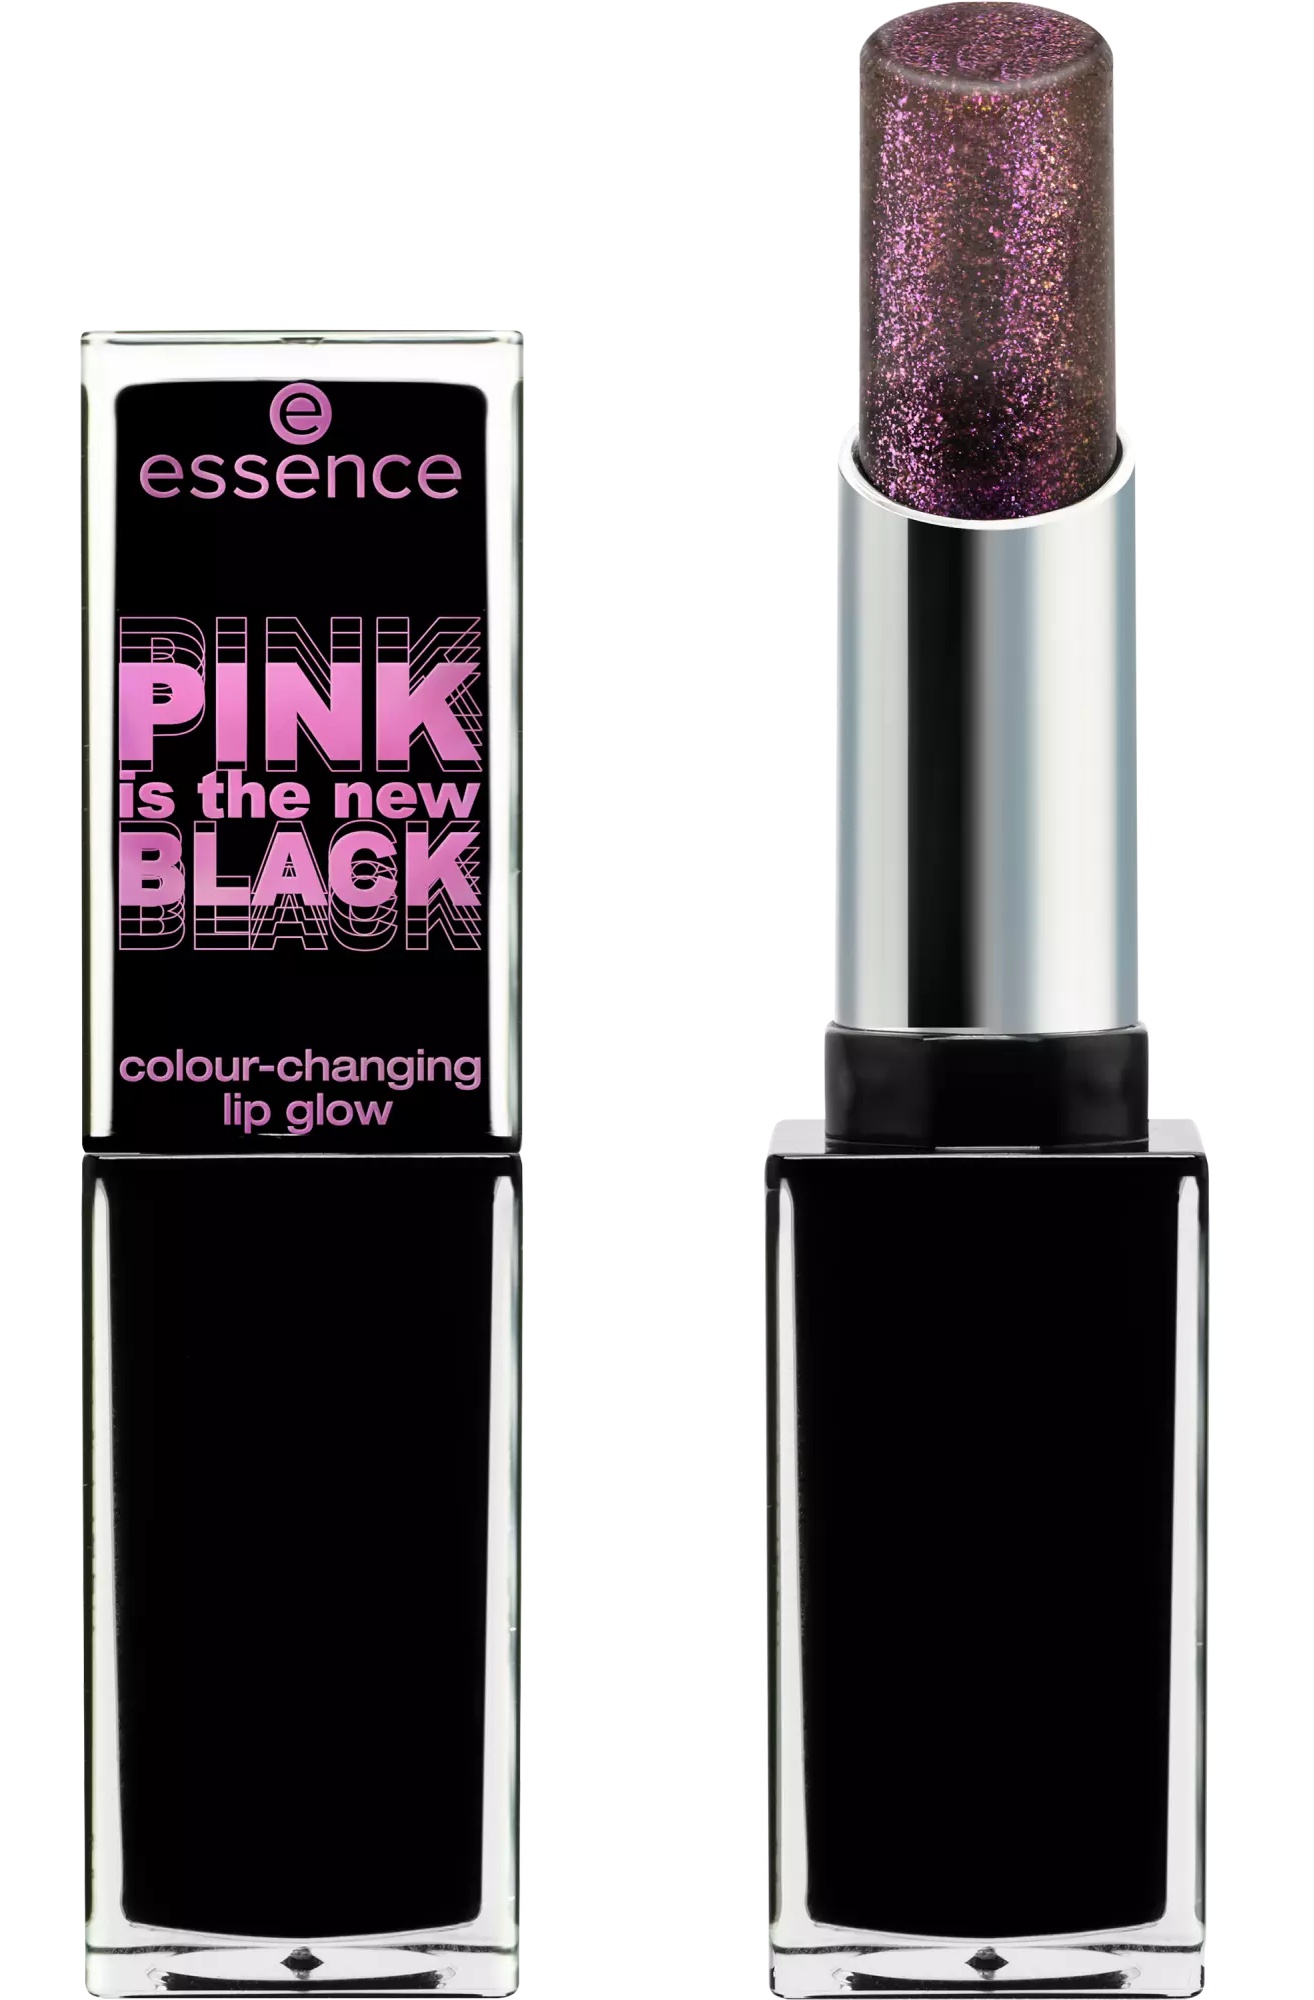 Essence Pink Is The New Black Colour-Changing Lip Glow